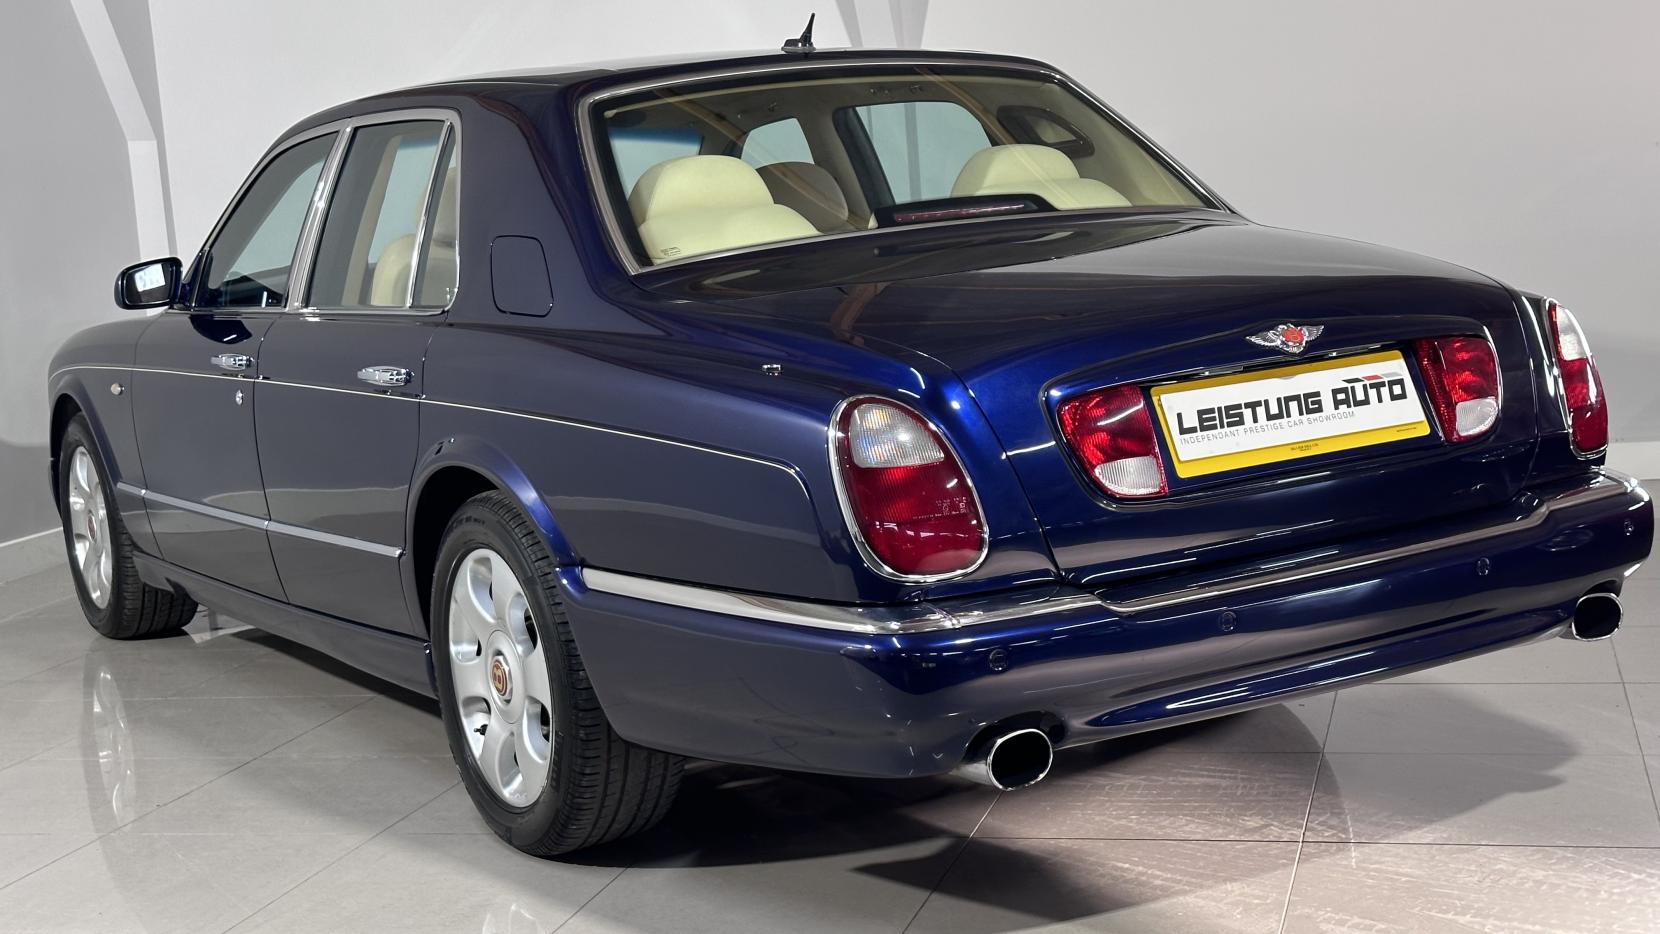 Bentley Arnage 6.8 Le Mans Series Saloon 4dr Petrol Automatic (456 g/km, 400 bhp)